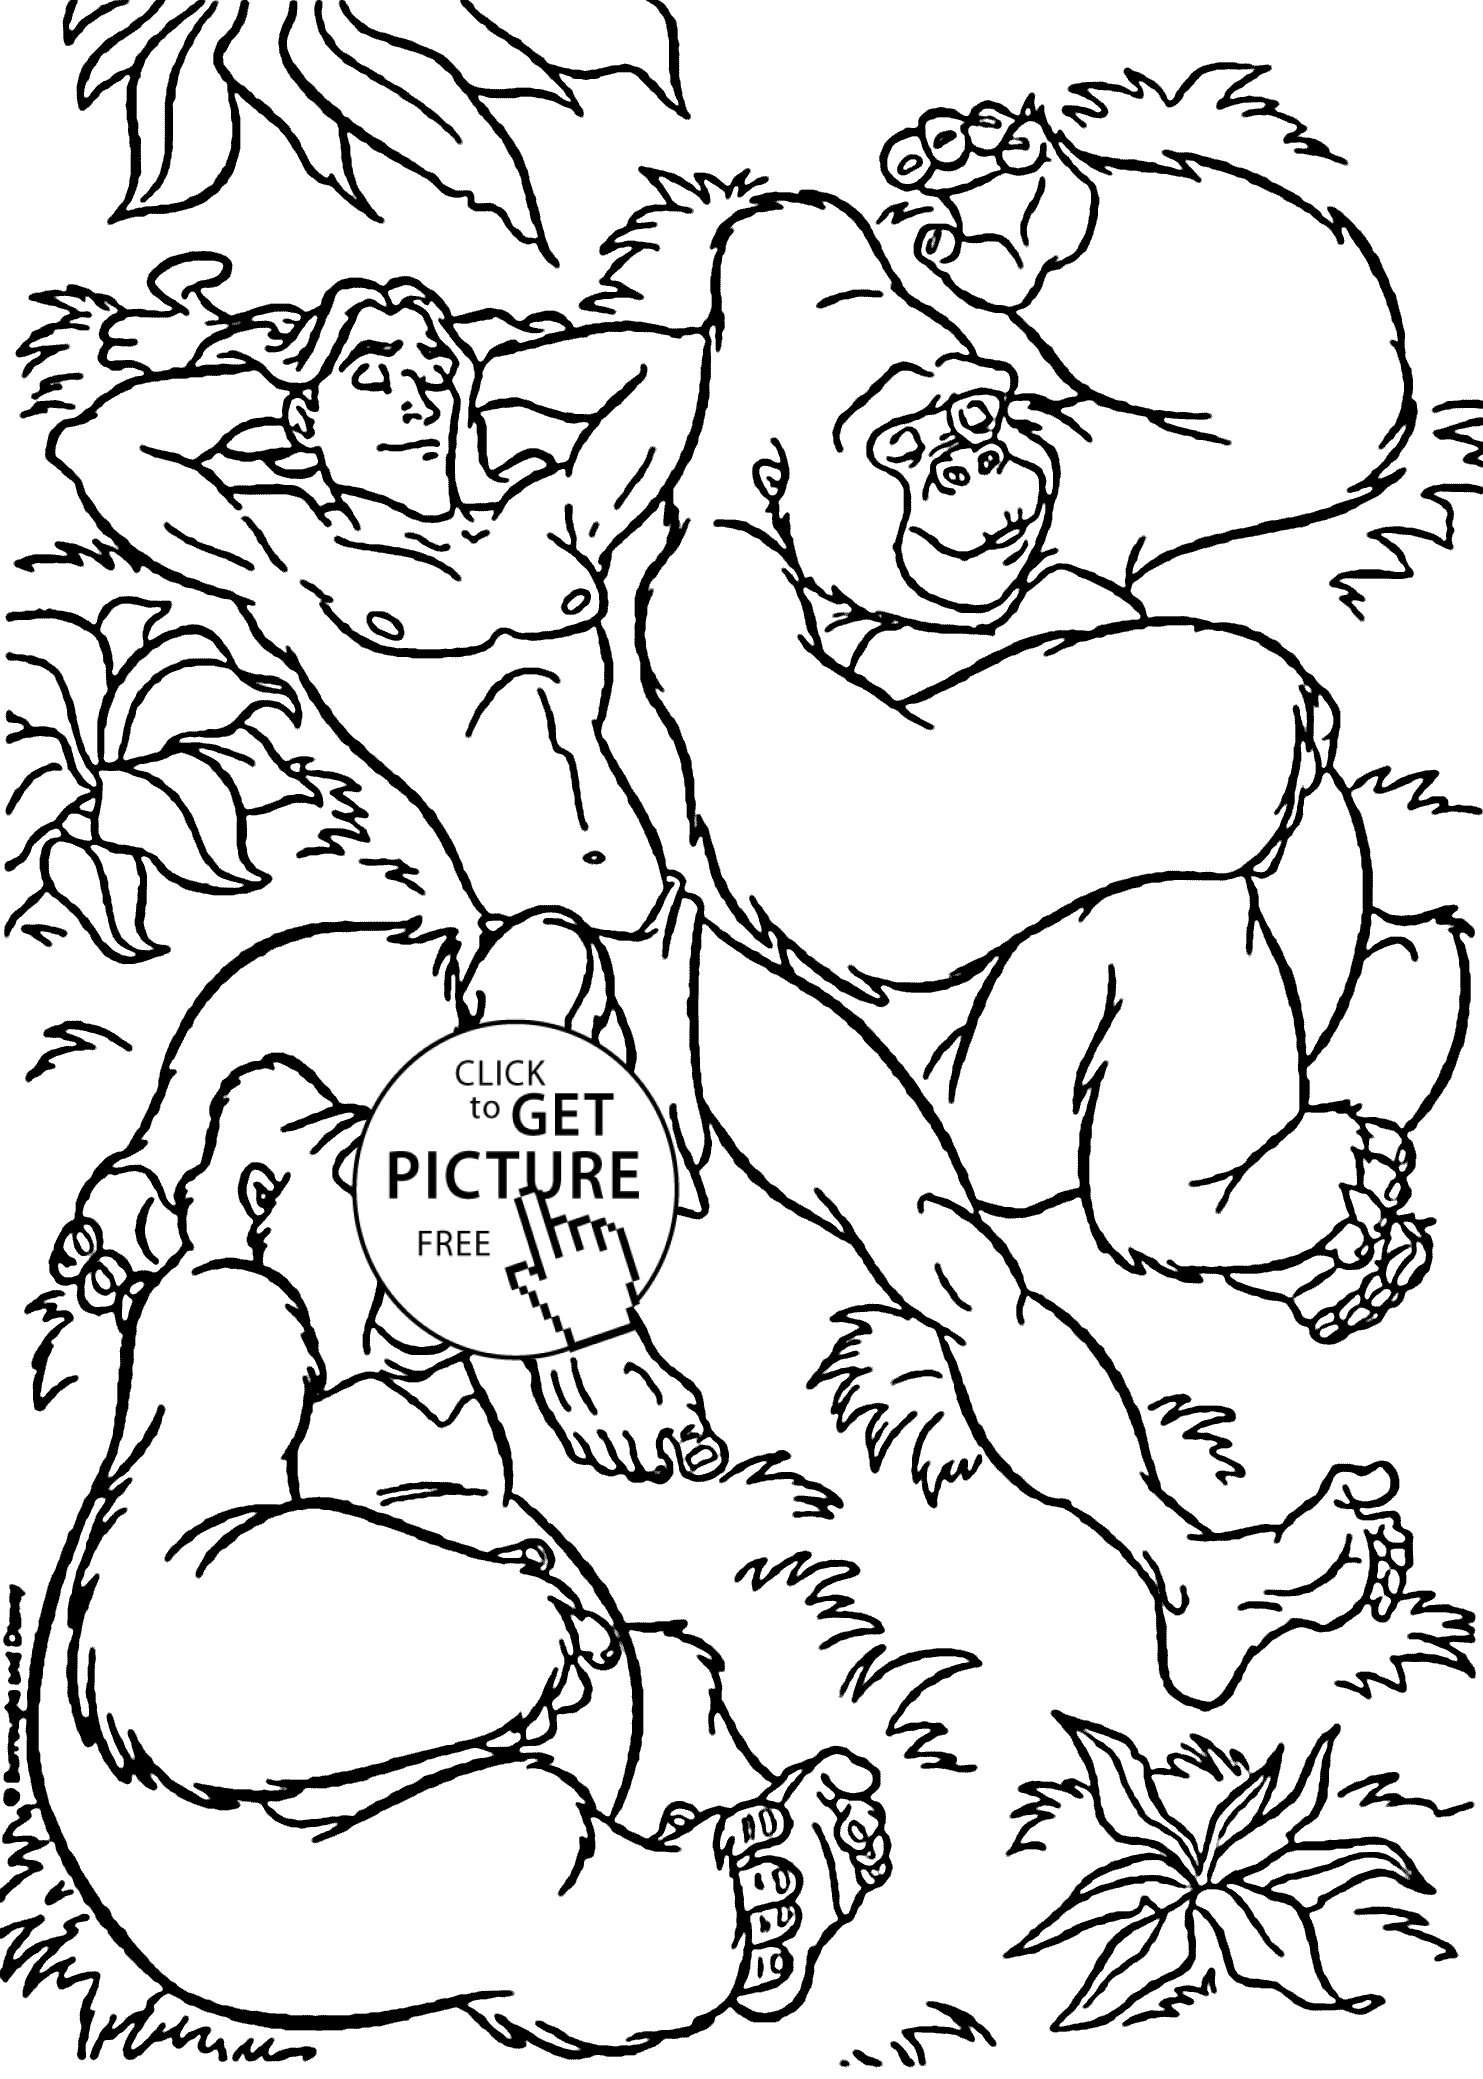 Tarzan and the gorilla sleep coloring pages for kids, printable free